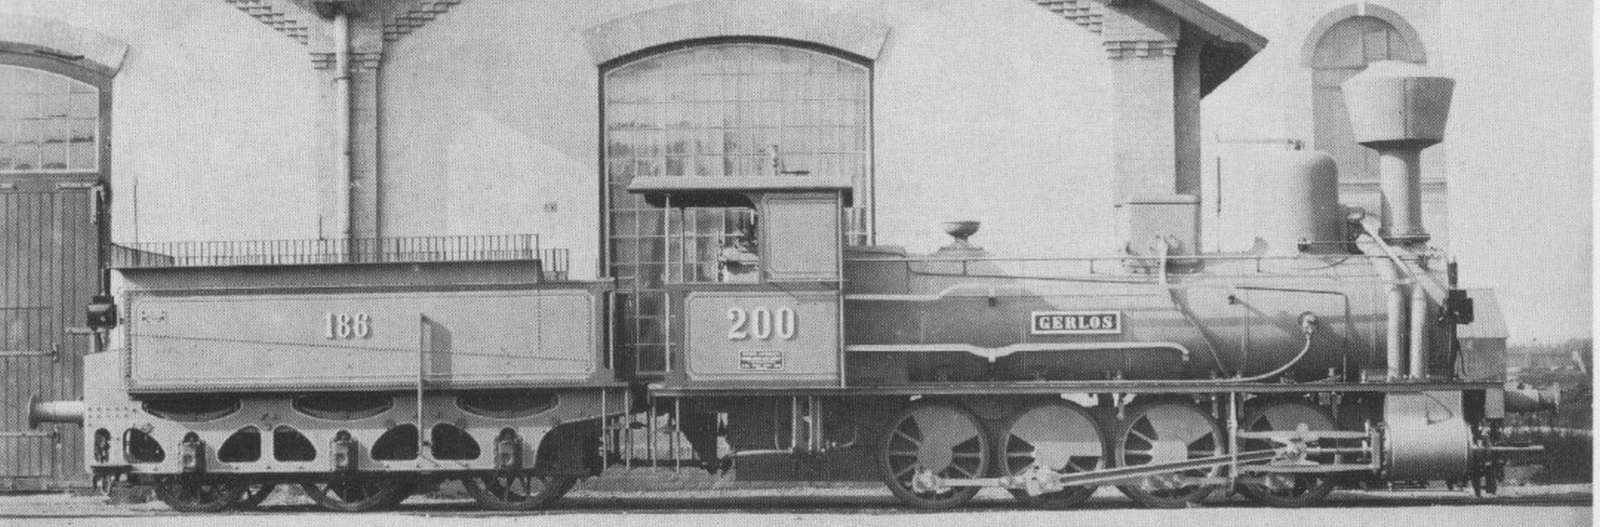 KEB No. 200, later kkStB 70.21 on a builder's photo